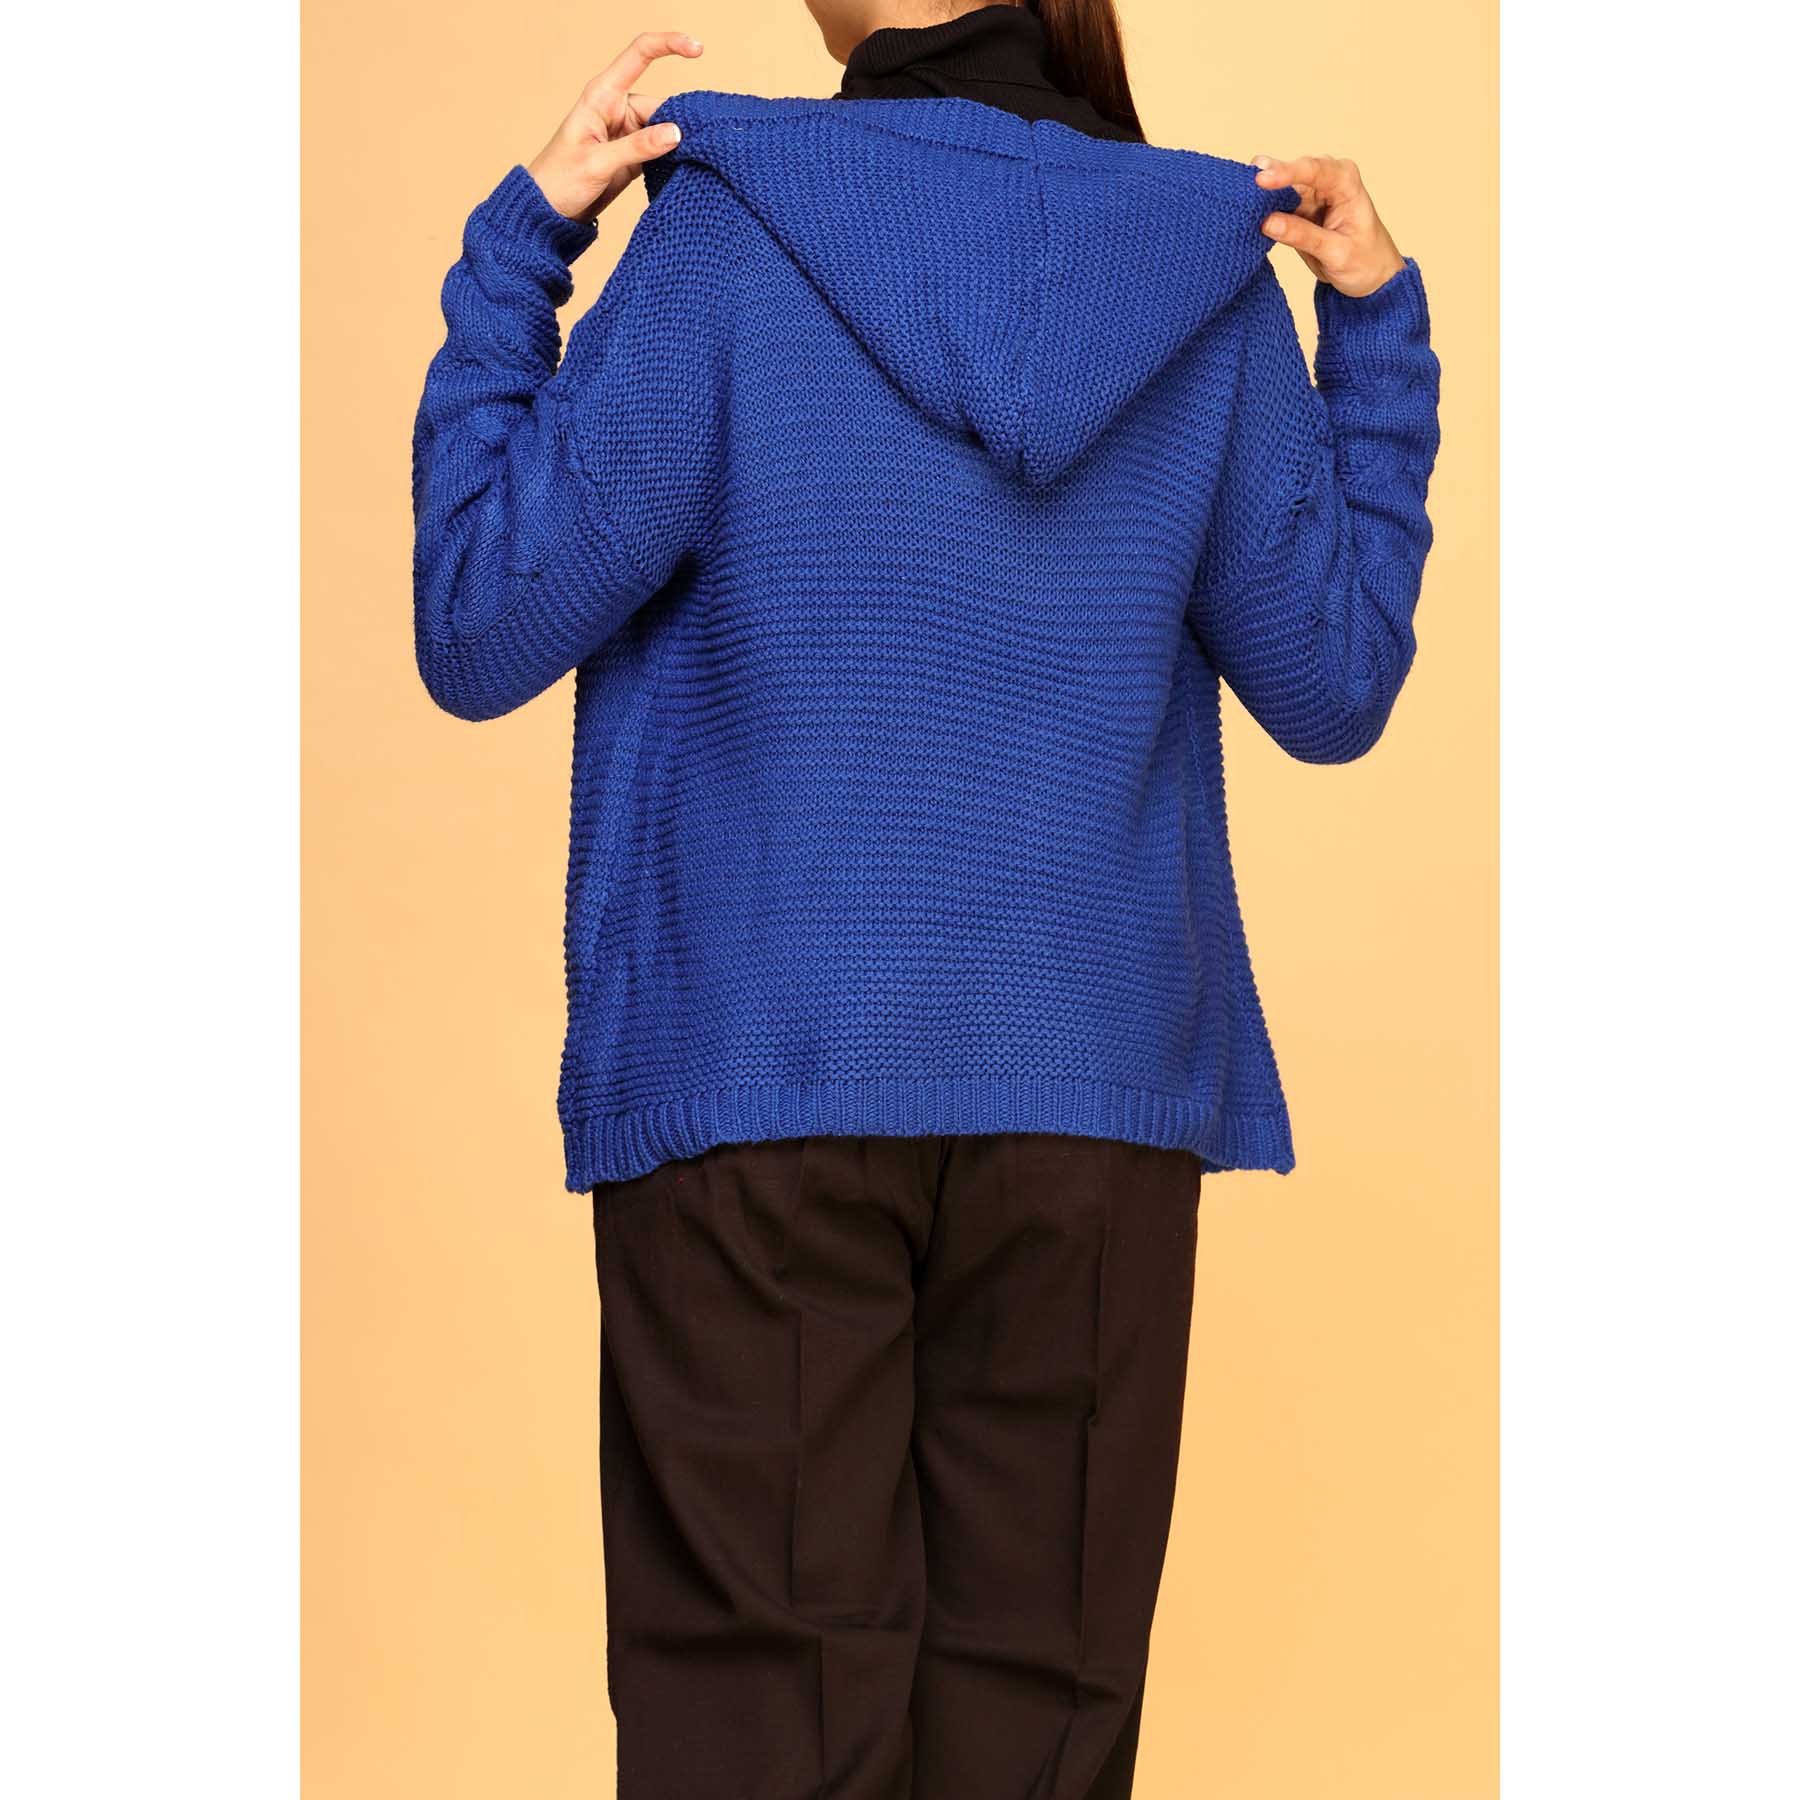 Blue Color Hooded Cardigan PW1917